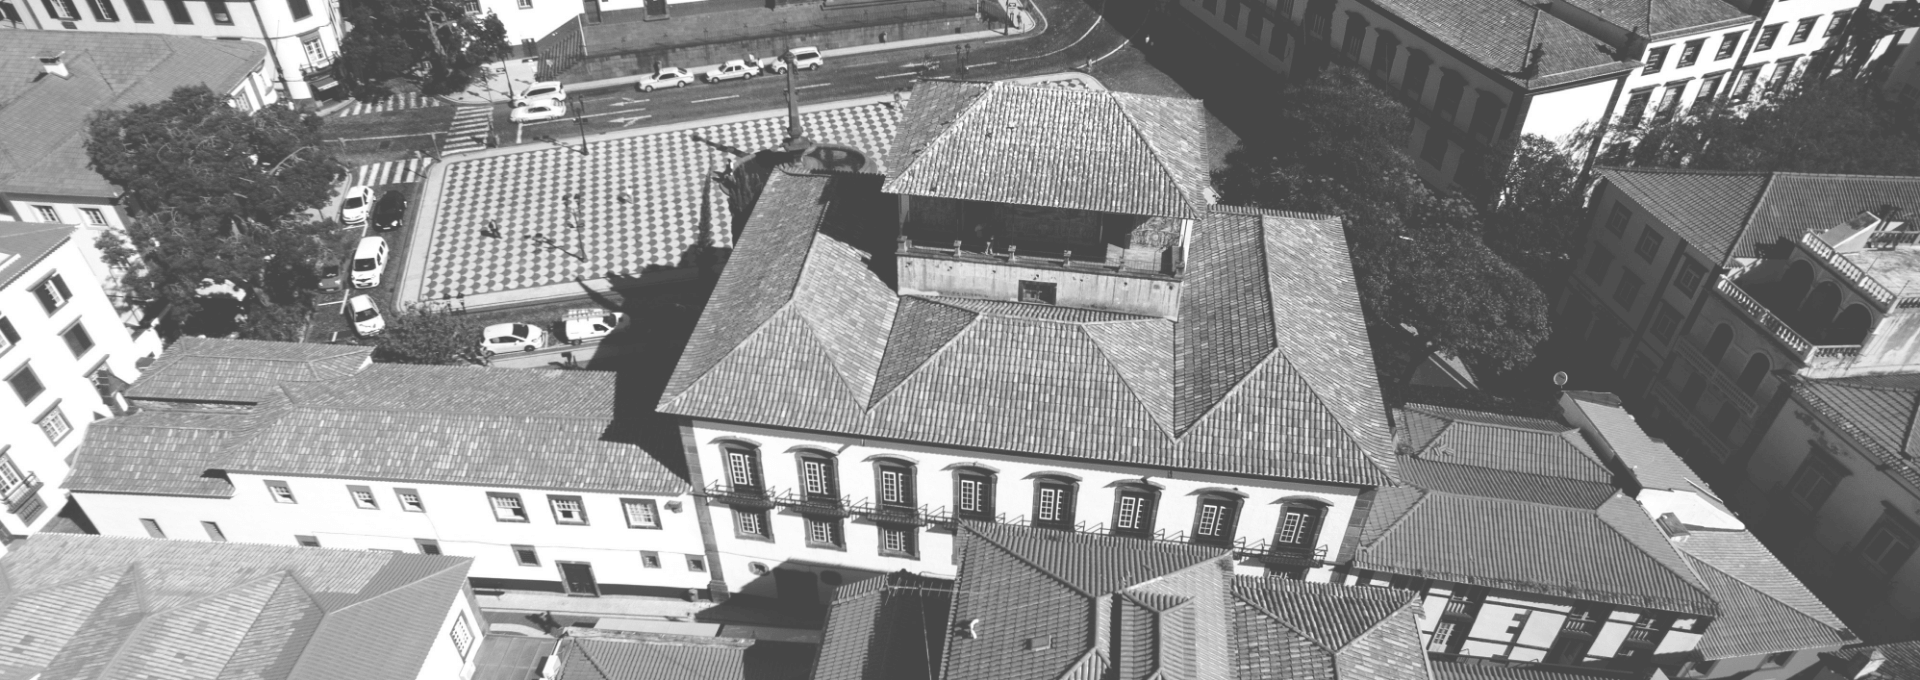 THE HISTORY OF THE MUSEUM AND BUILDING 